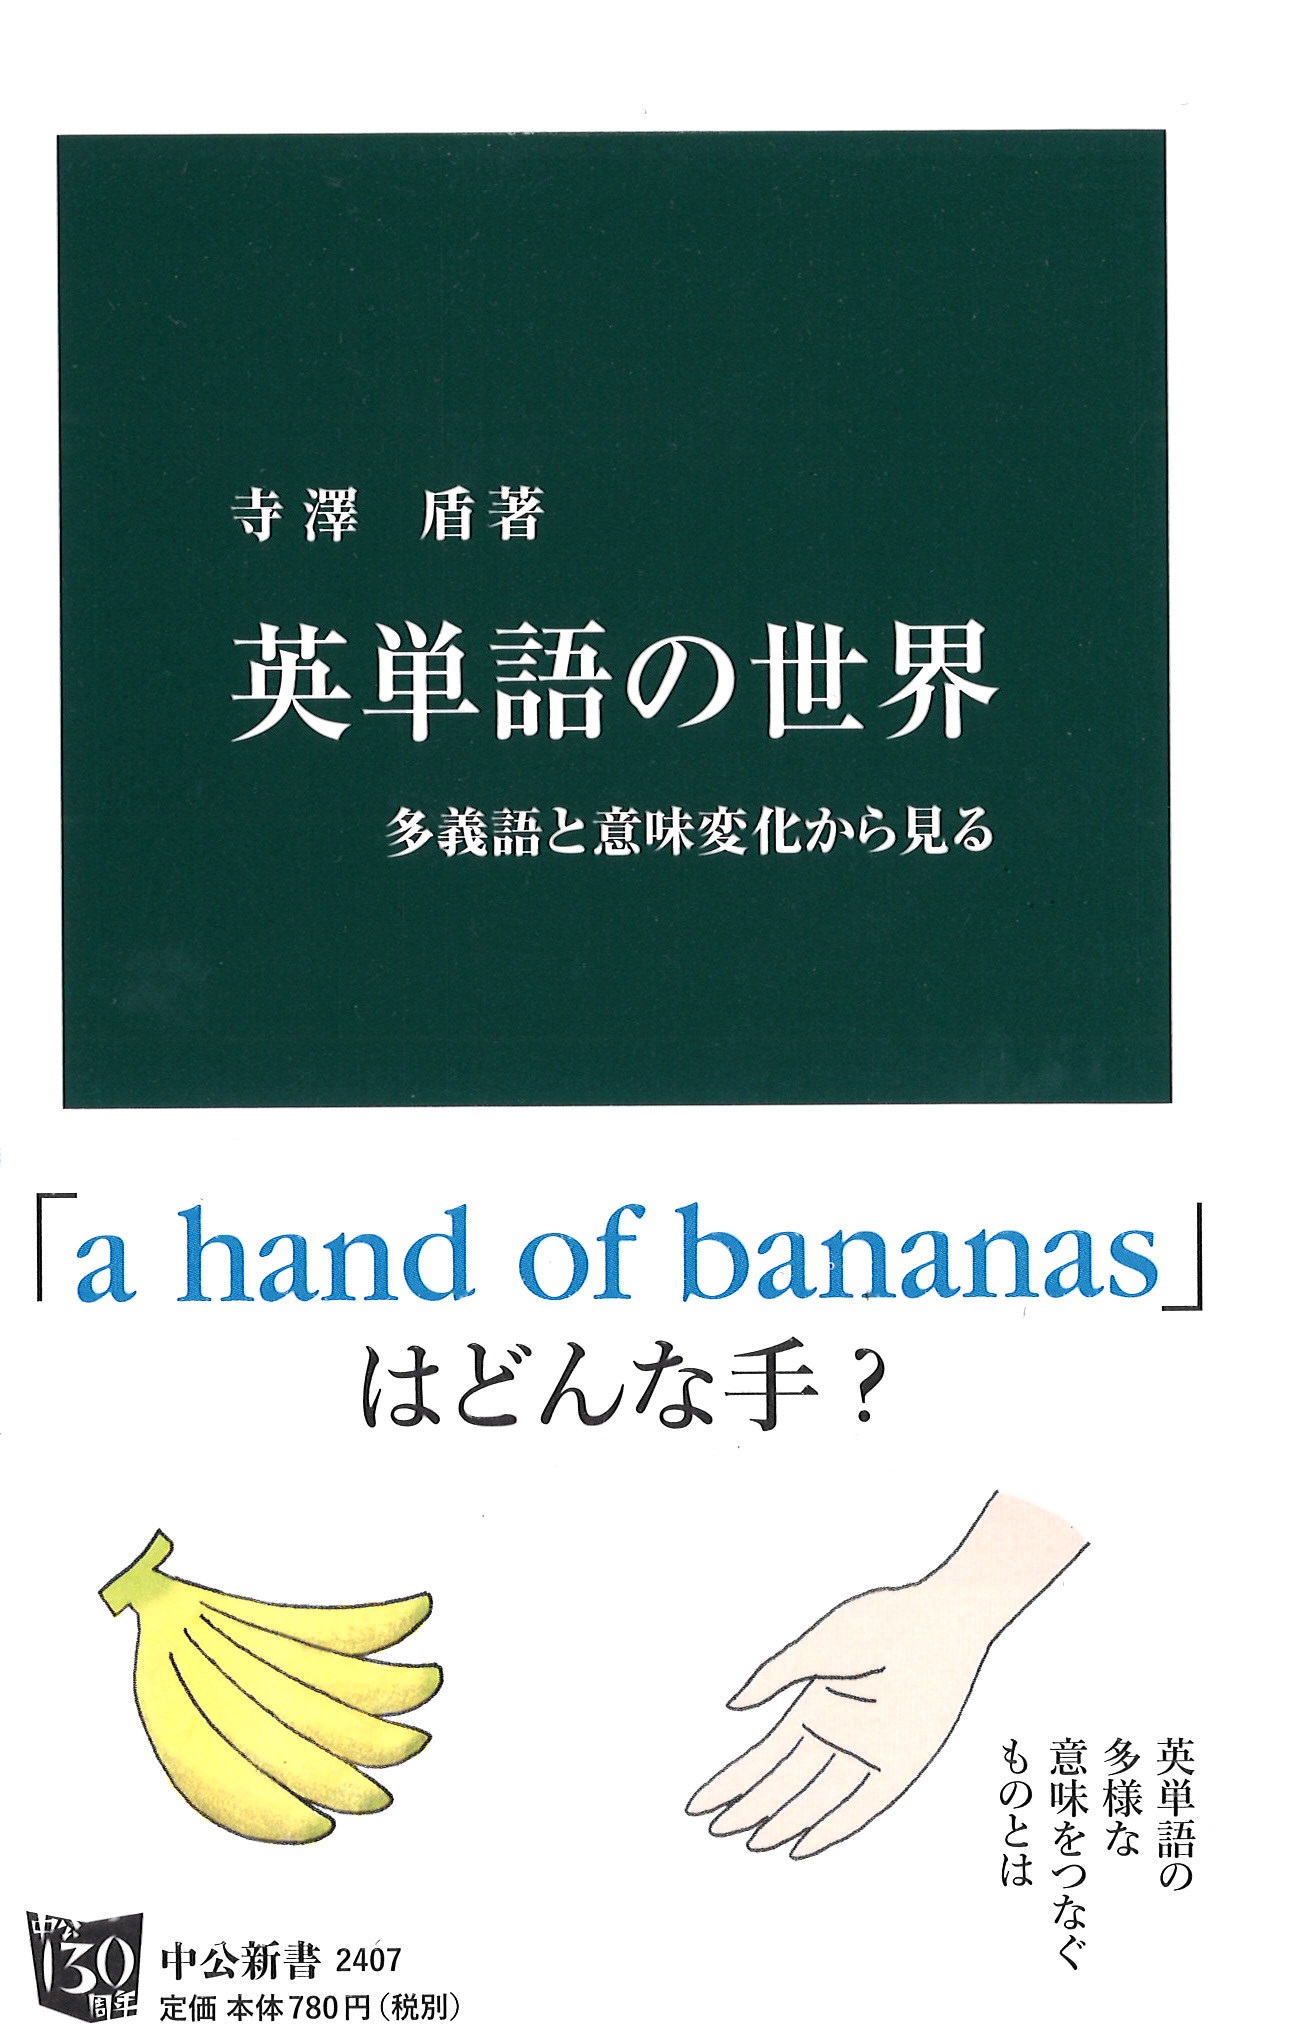 A white and dark green cover with the illustration saying “what kind of hand is a hand of bananas?”